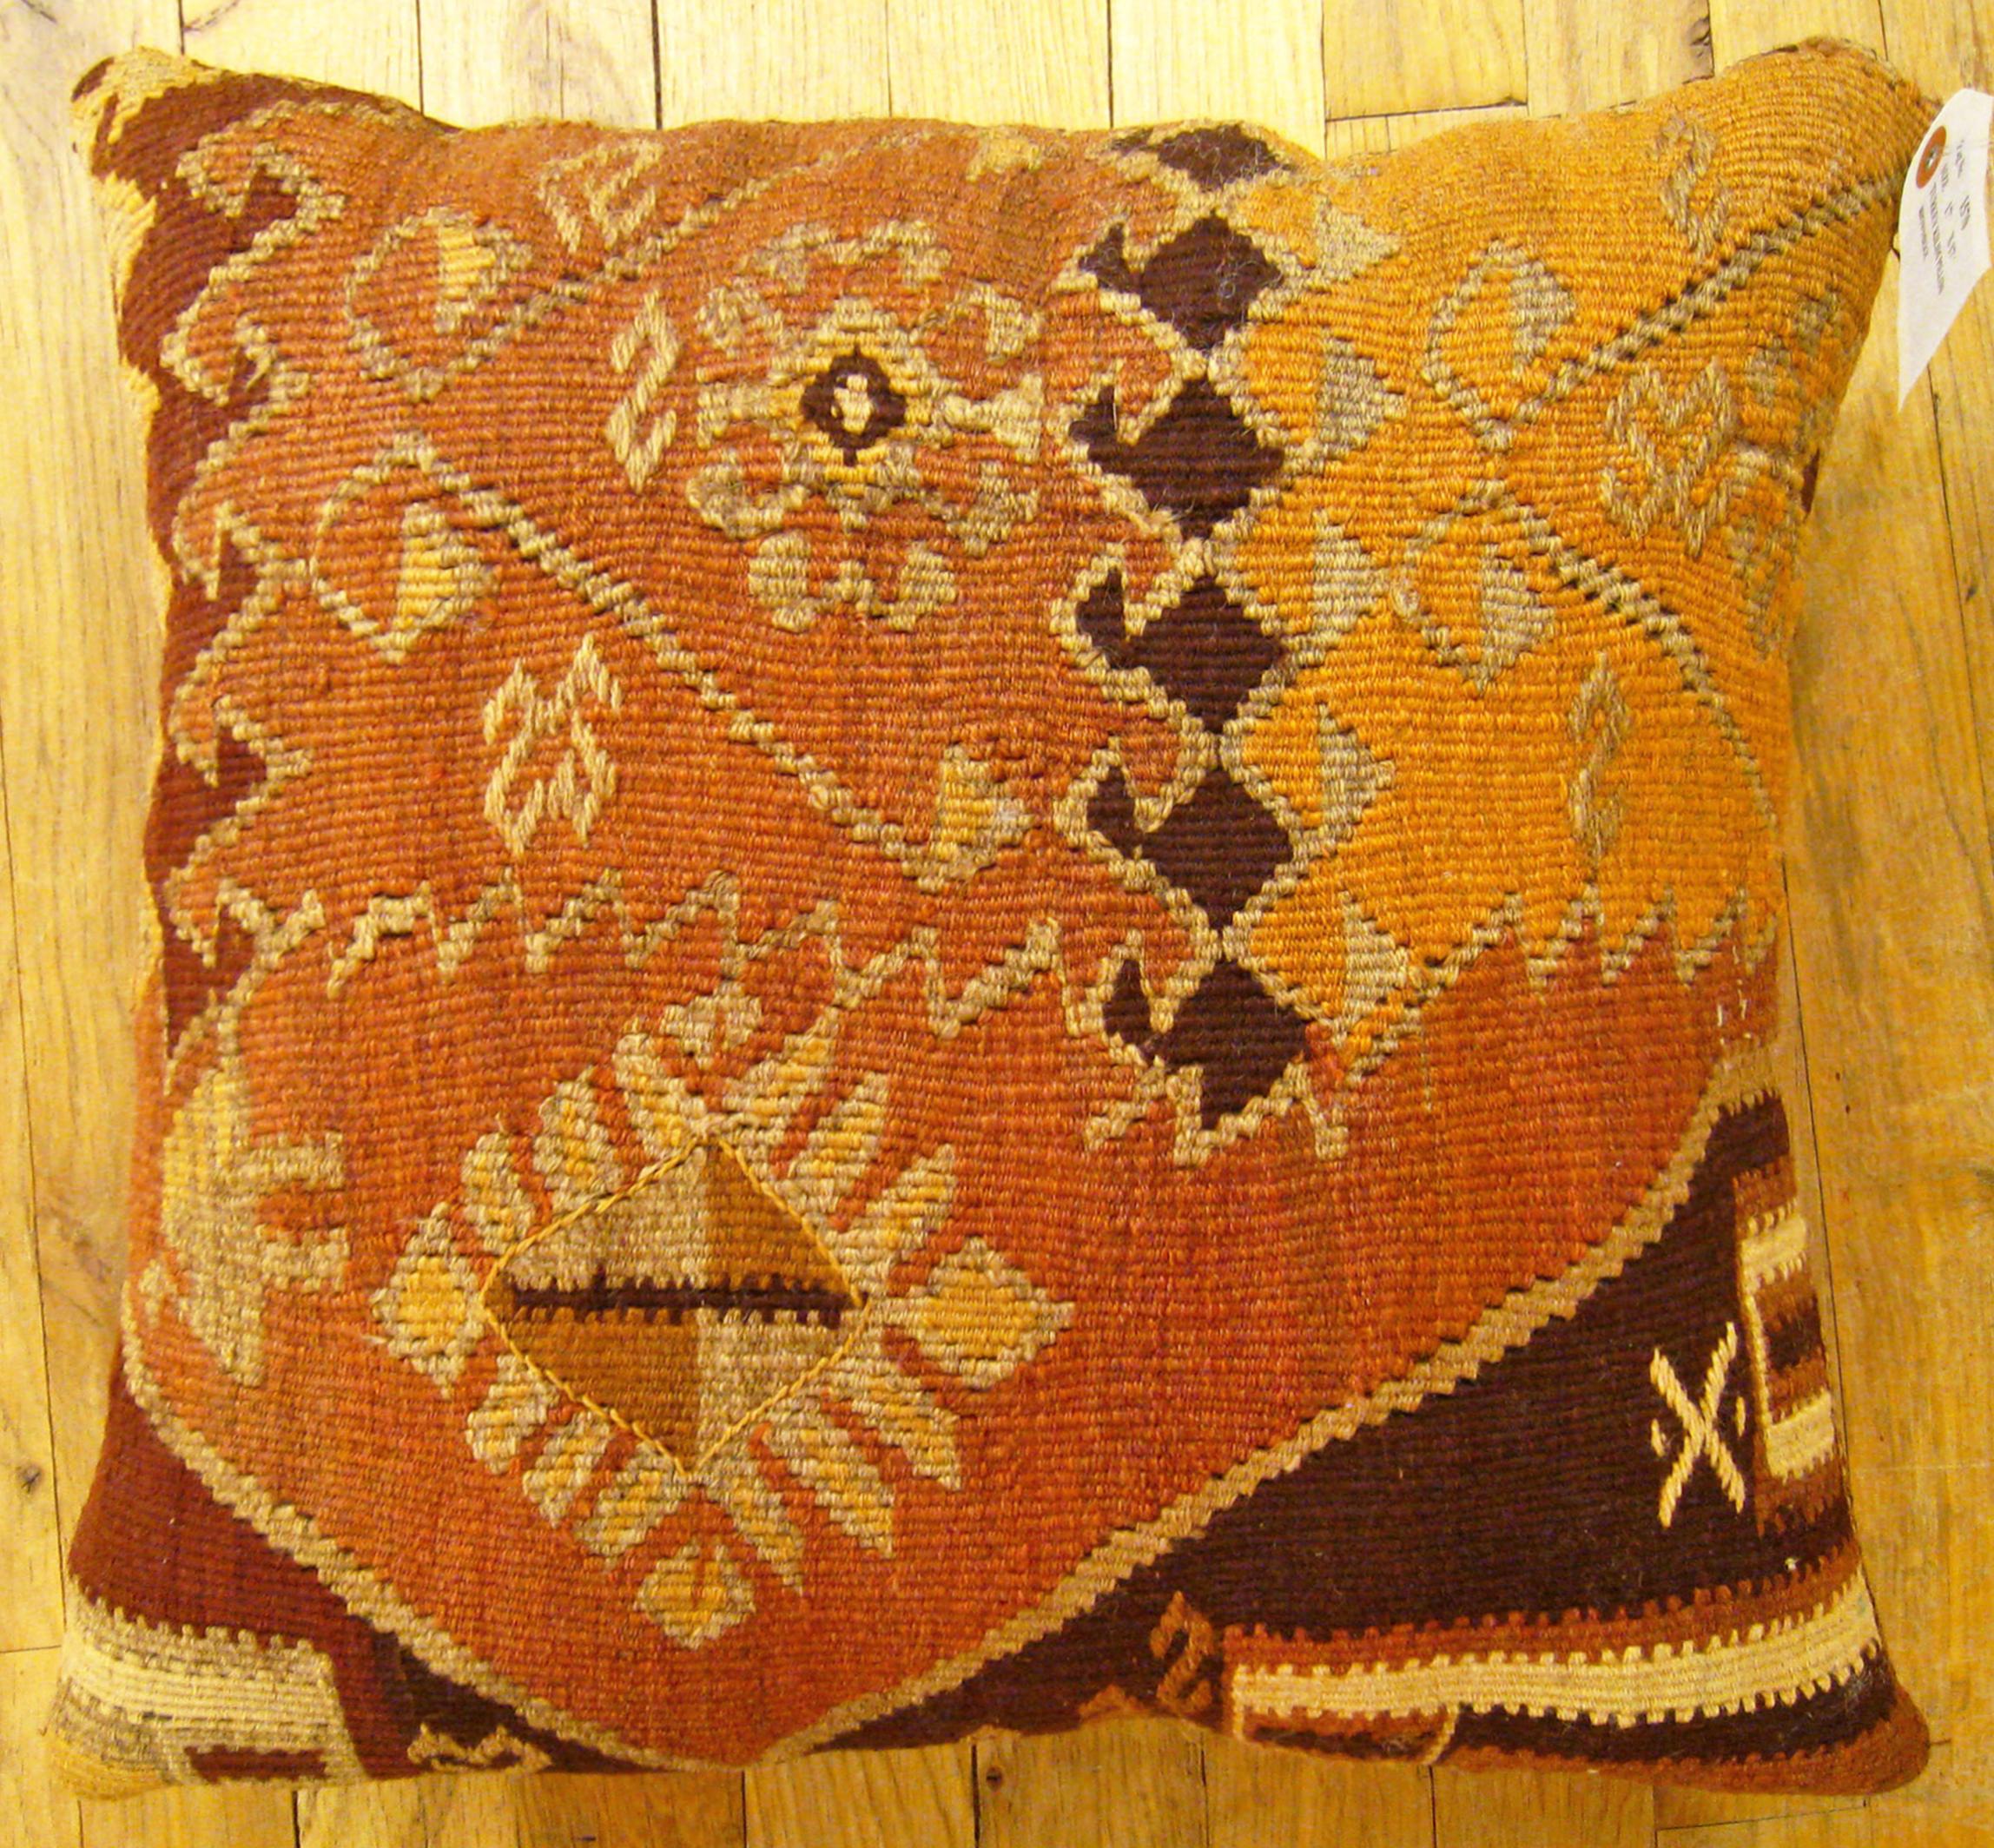 Vintage Turkish Kilim Rug Pillow; size 17” x 17”.

A vintage decorative pillow with geometric abstracts allover a brown central field, size 17” x 17”. This lovely decorative pillow features a vintage fabric of a KIilim carpet on front which is